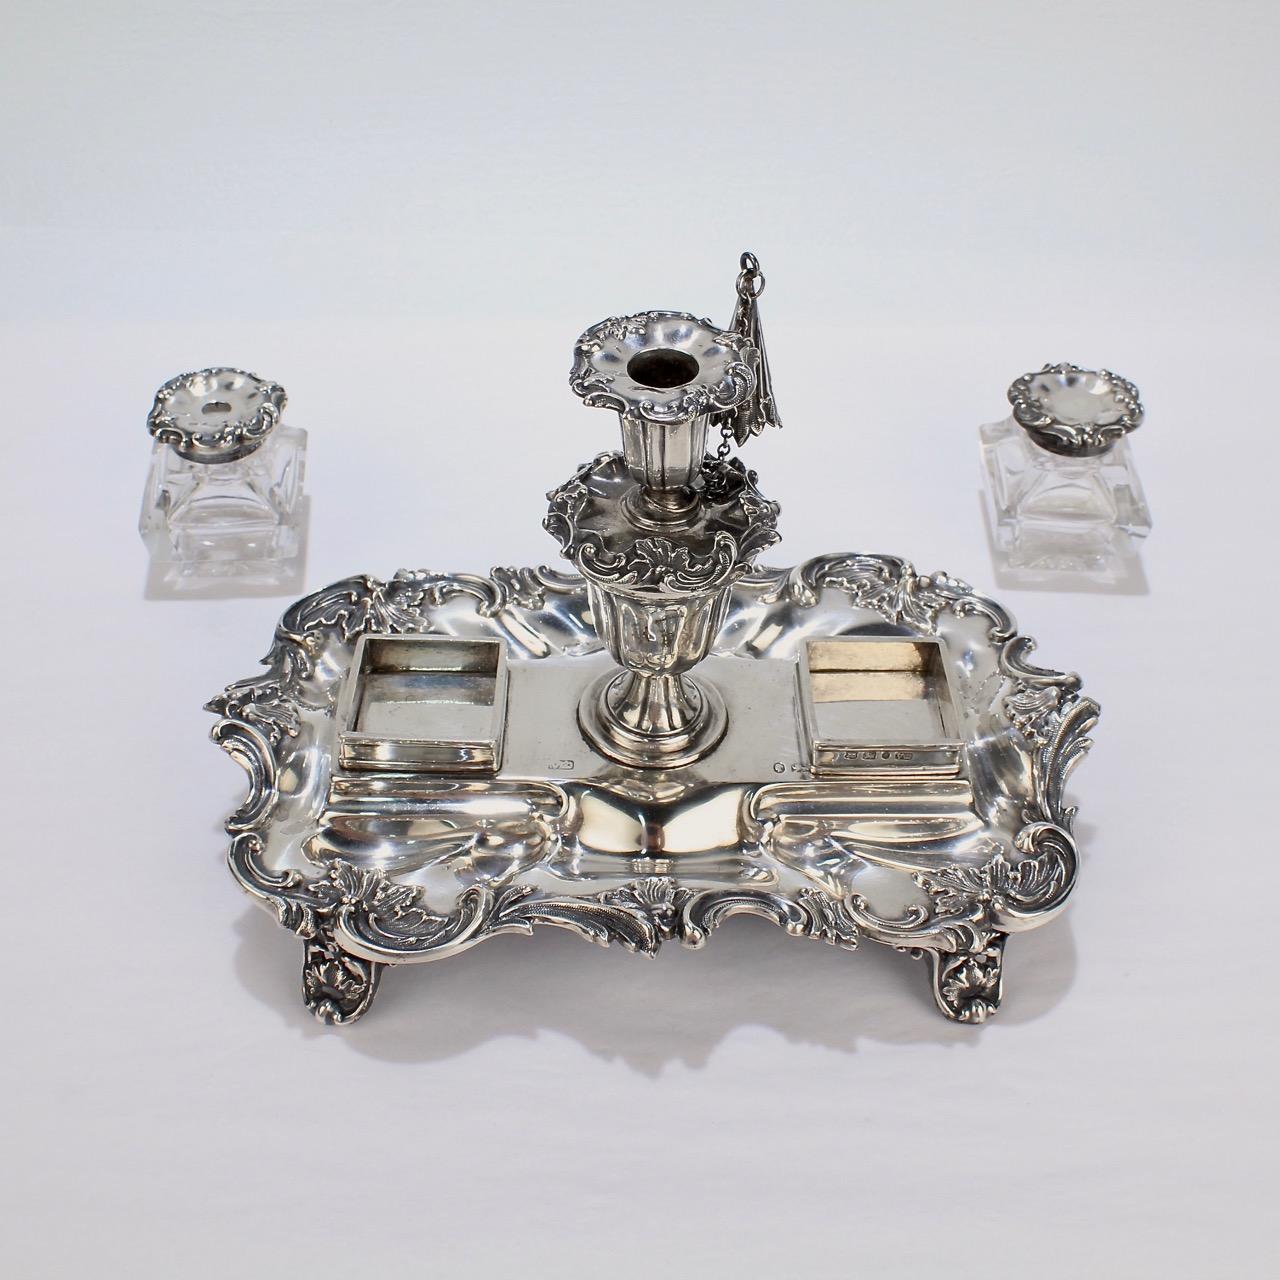 Exceptional Early Victorian English Sterling Silver Inkstand by Henry Wilkinson For Sale 2